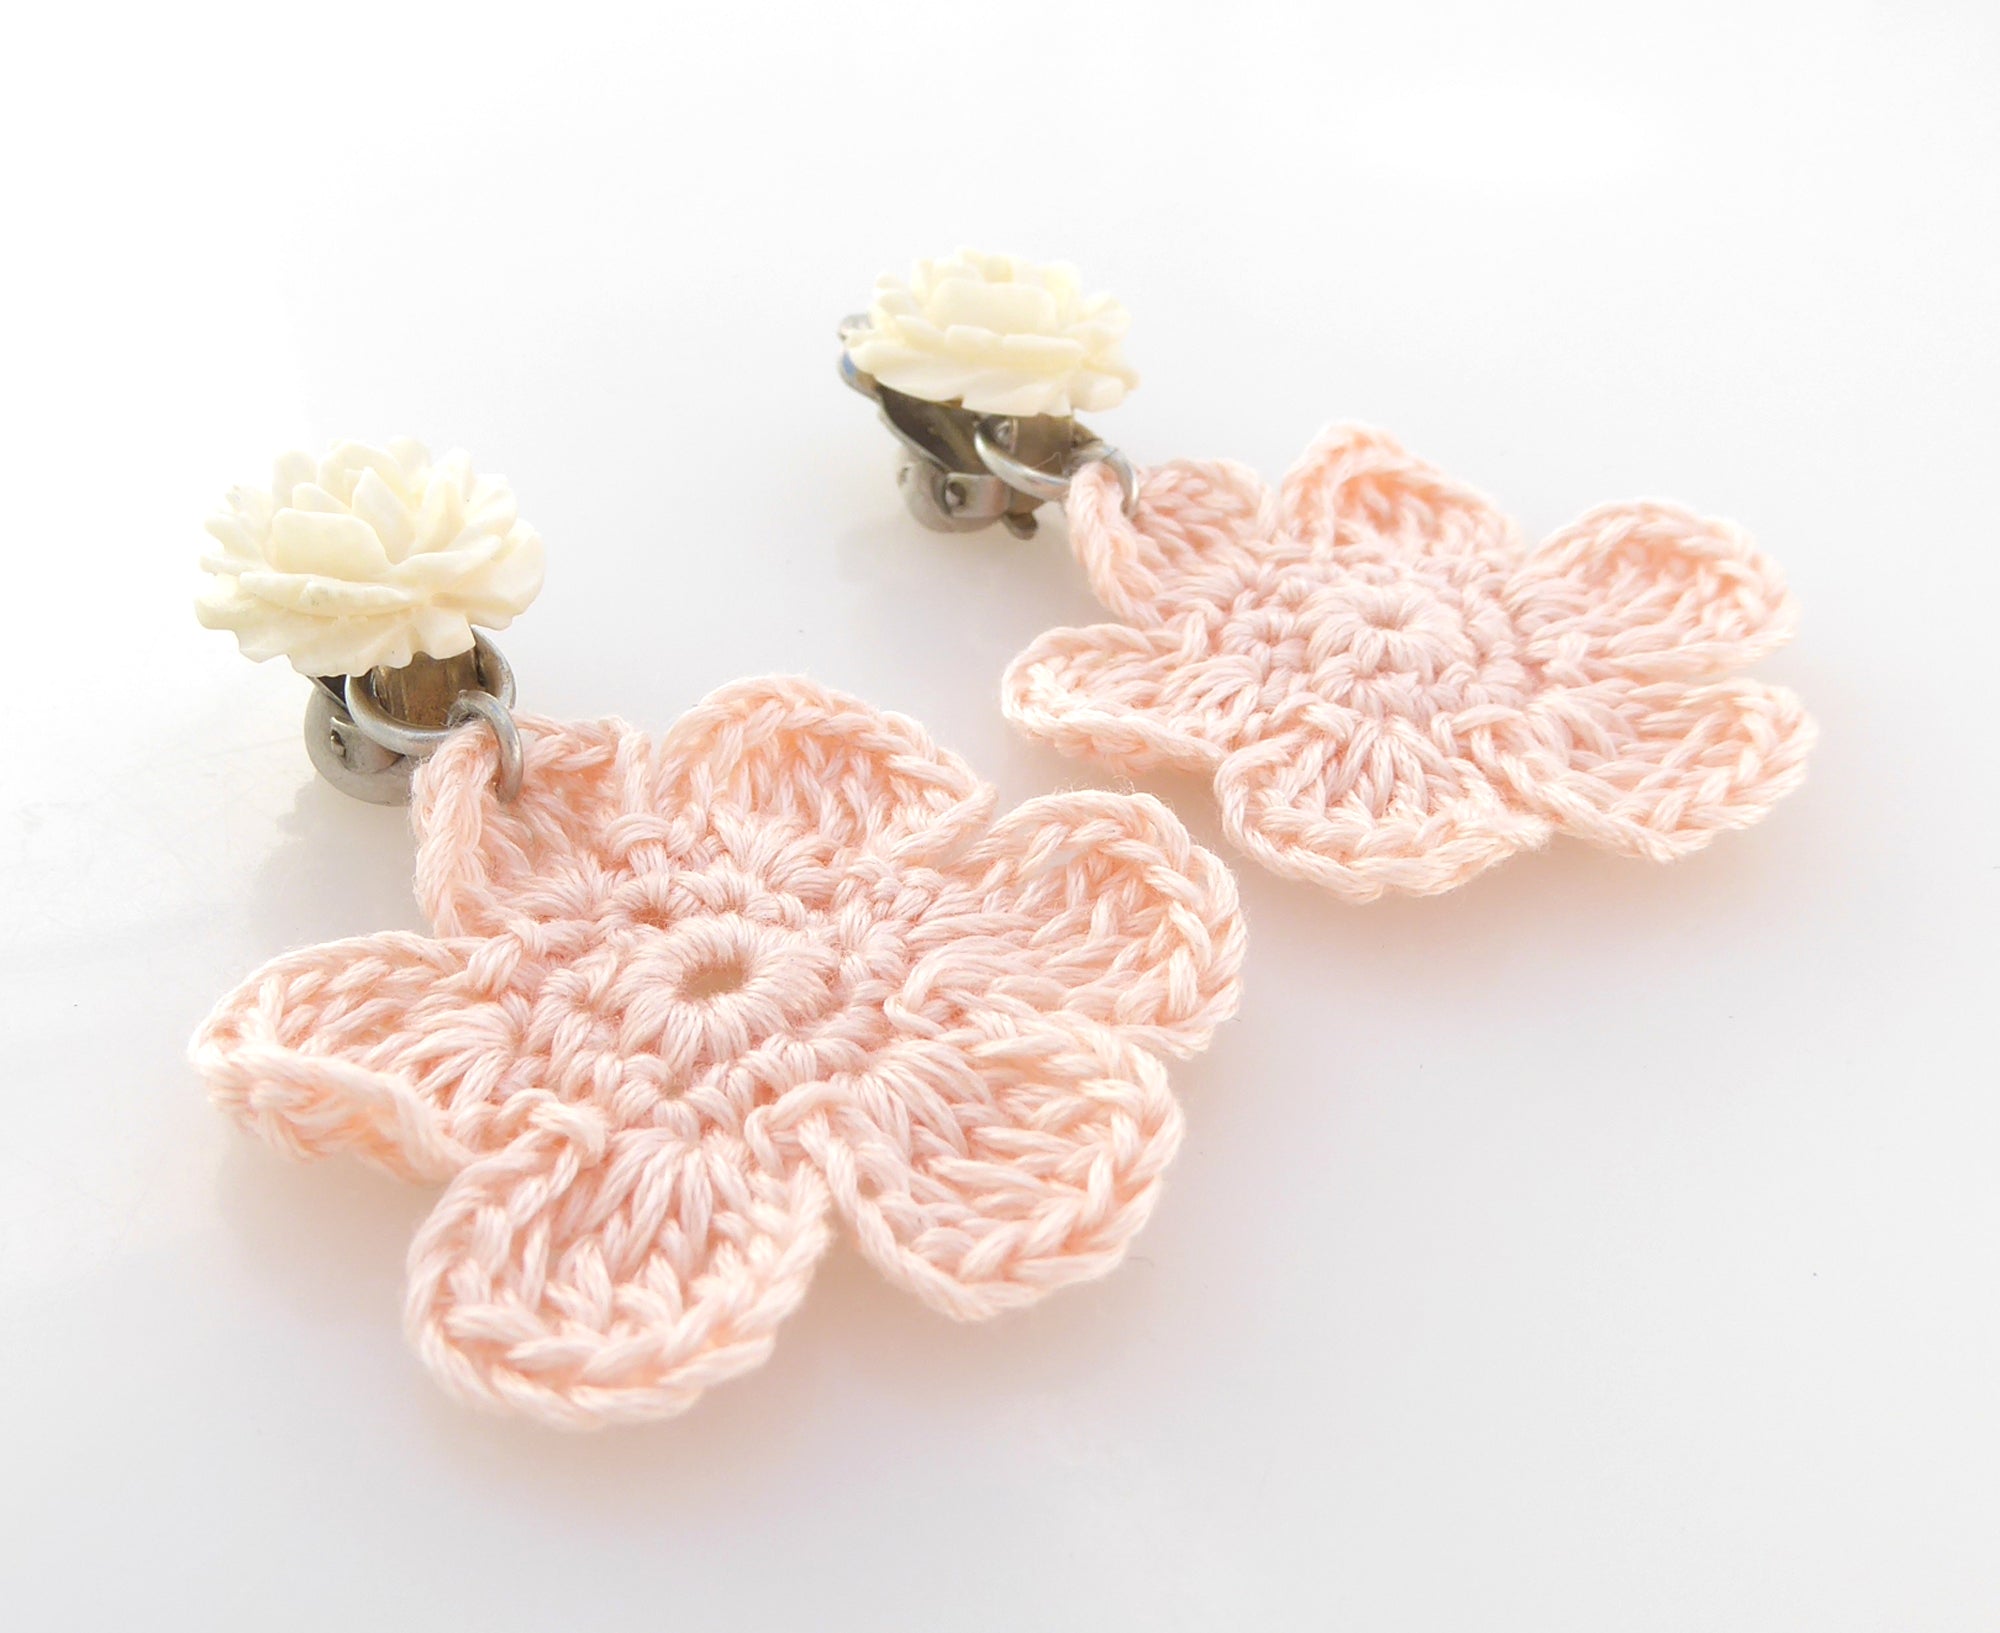 1950s celluloid rose and pale pink crochet flower earrings by Jenny Dayco 2